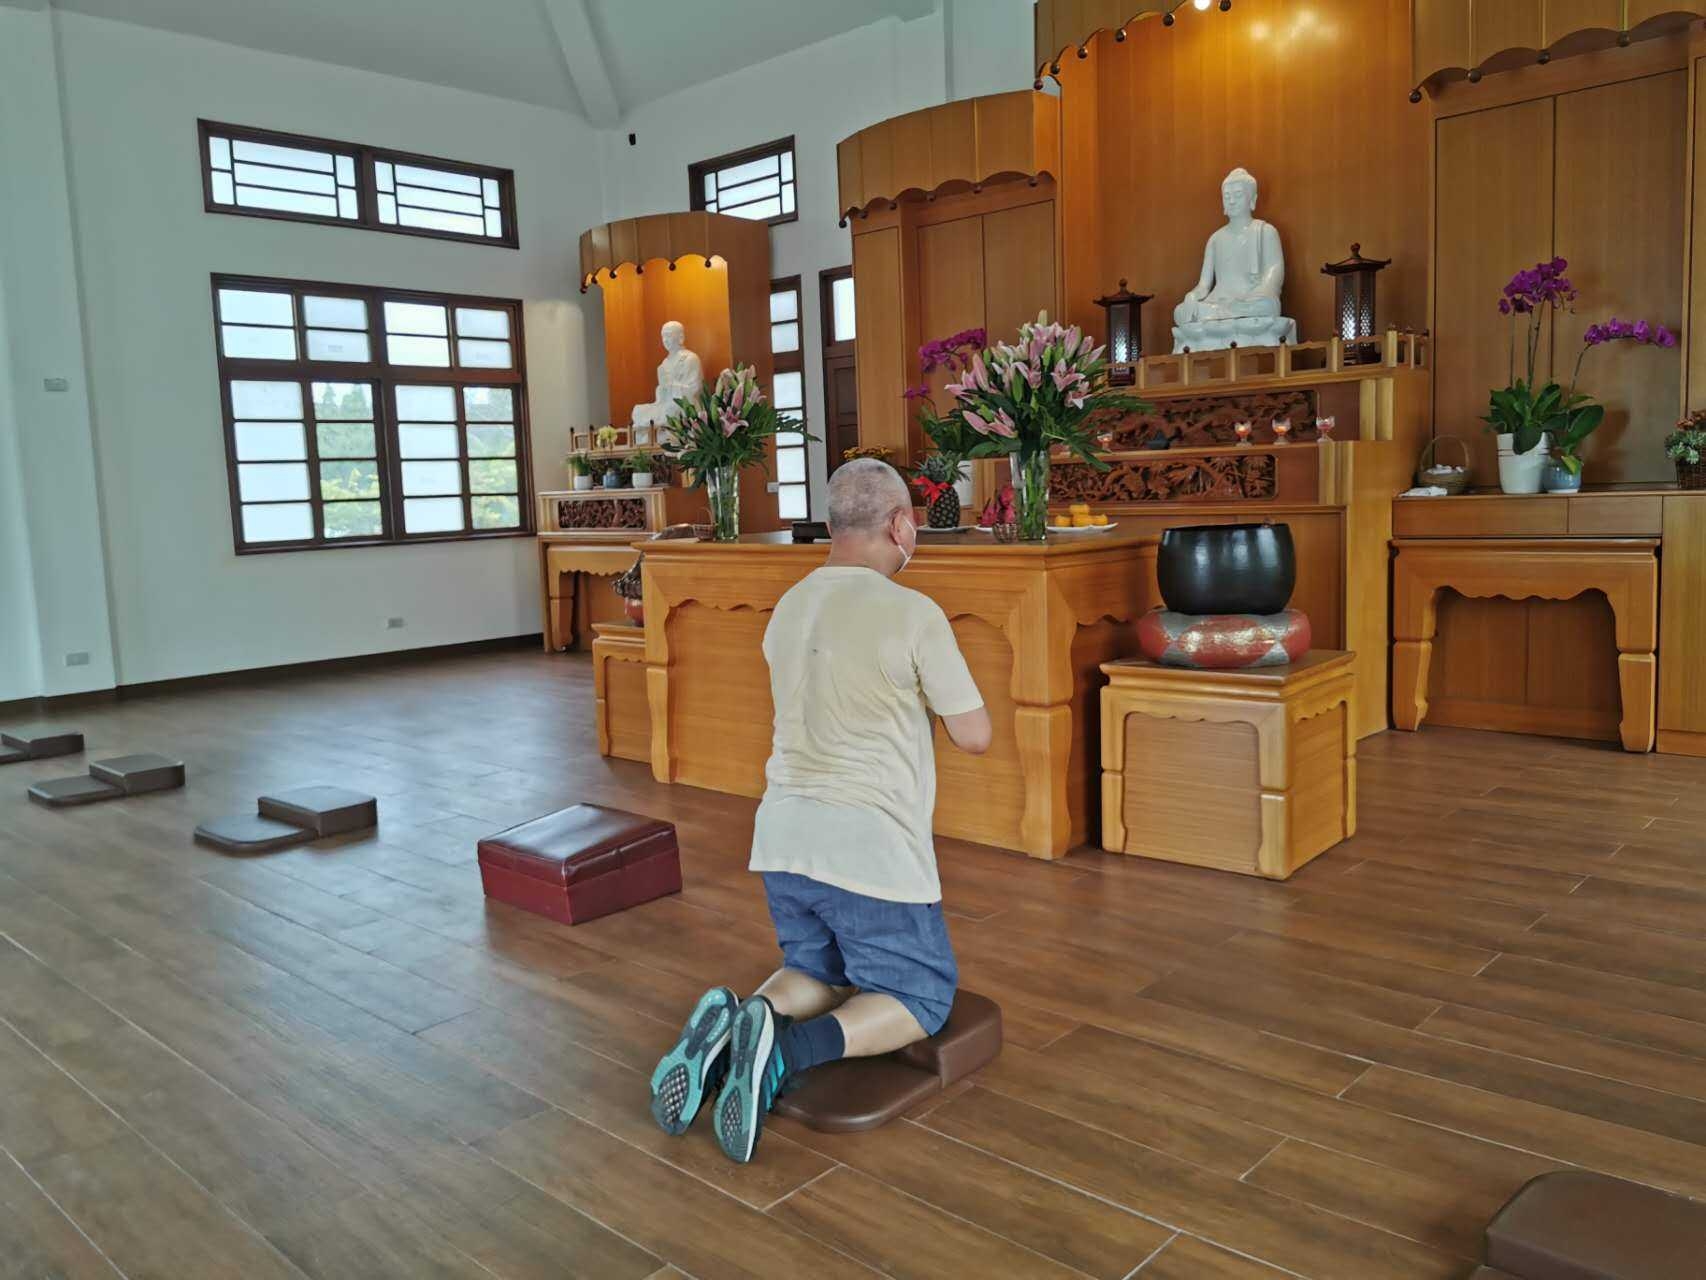  A guest spends quiet time in prayer inside the Jing Si Abode.